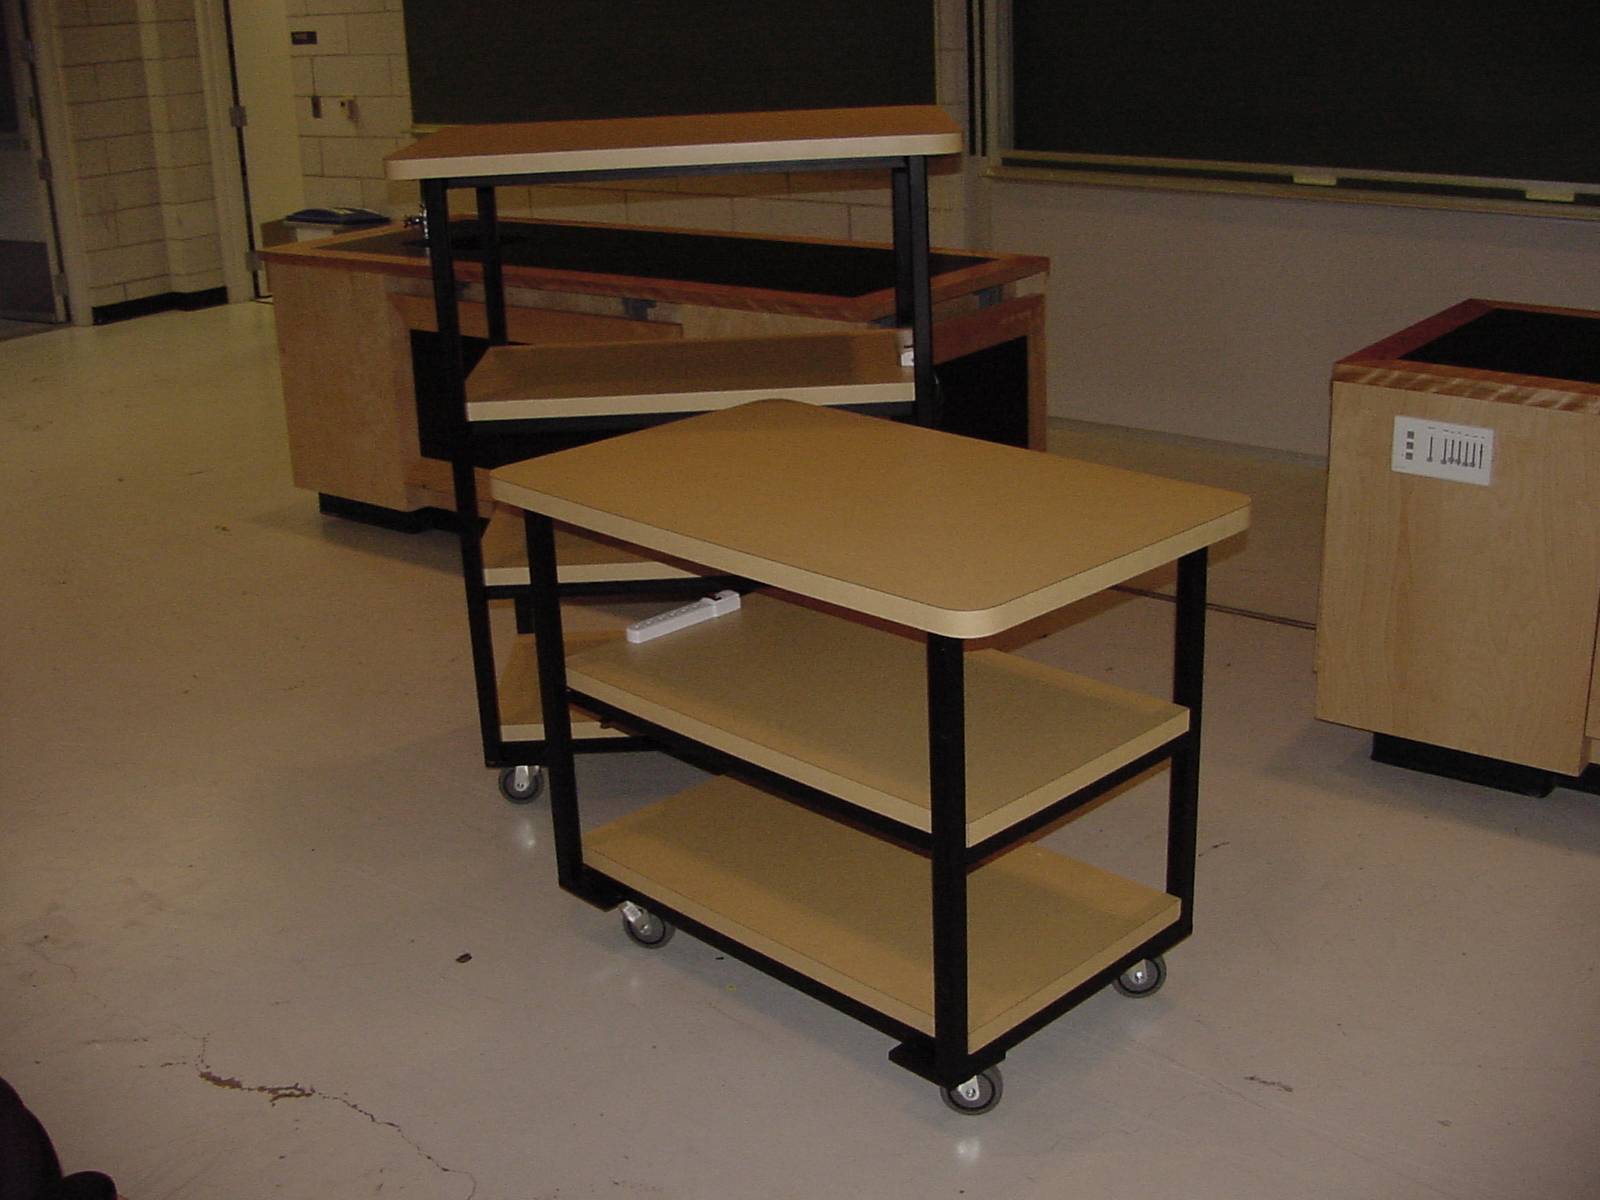 A Lecture Demonstration Carts